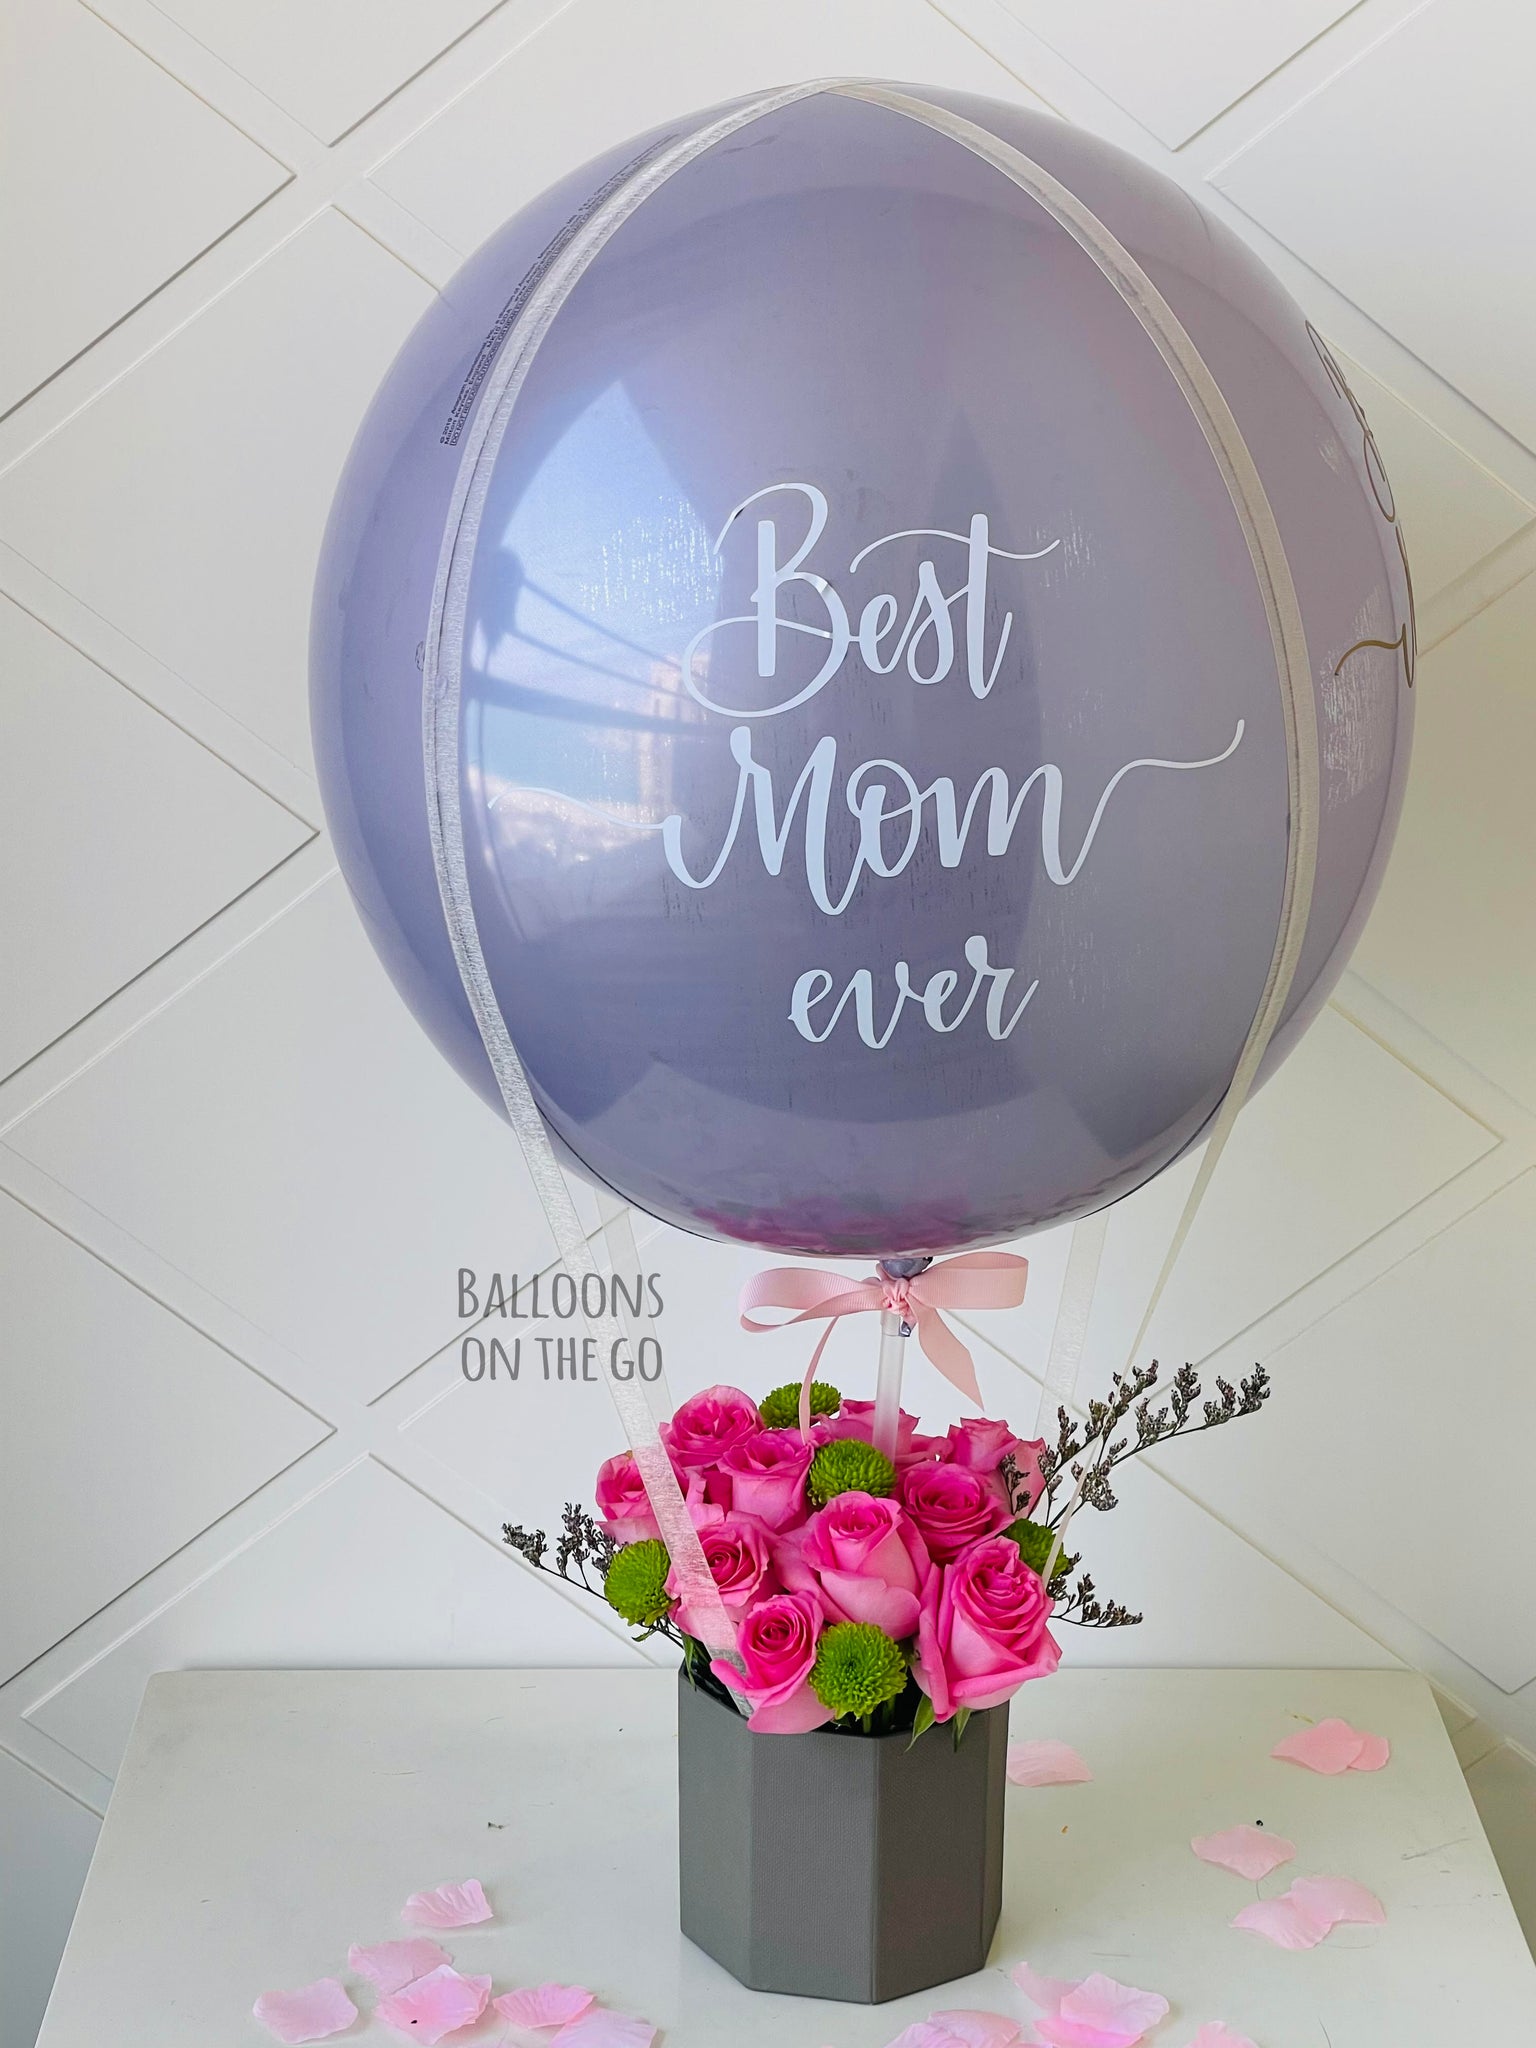 Mother's Day Hot Air Balloon Basket